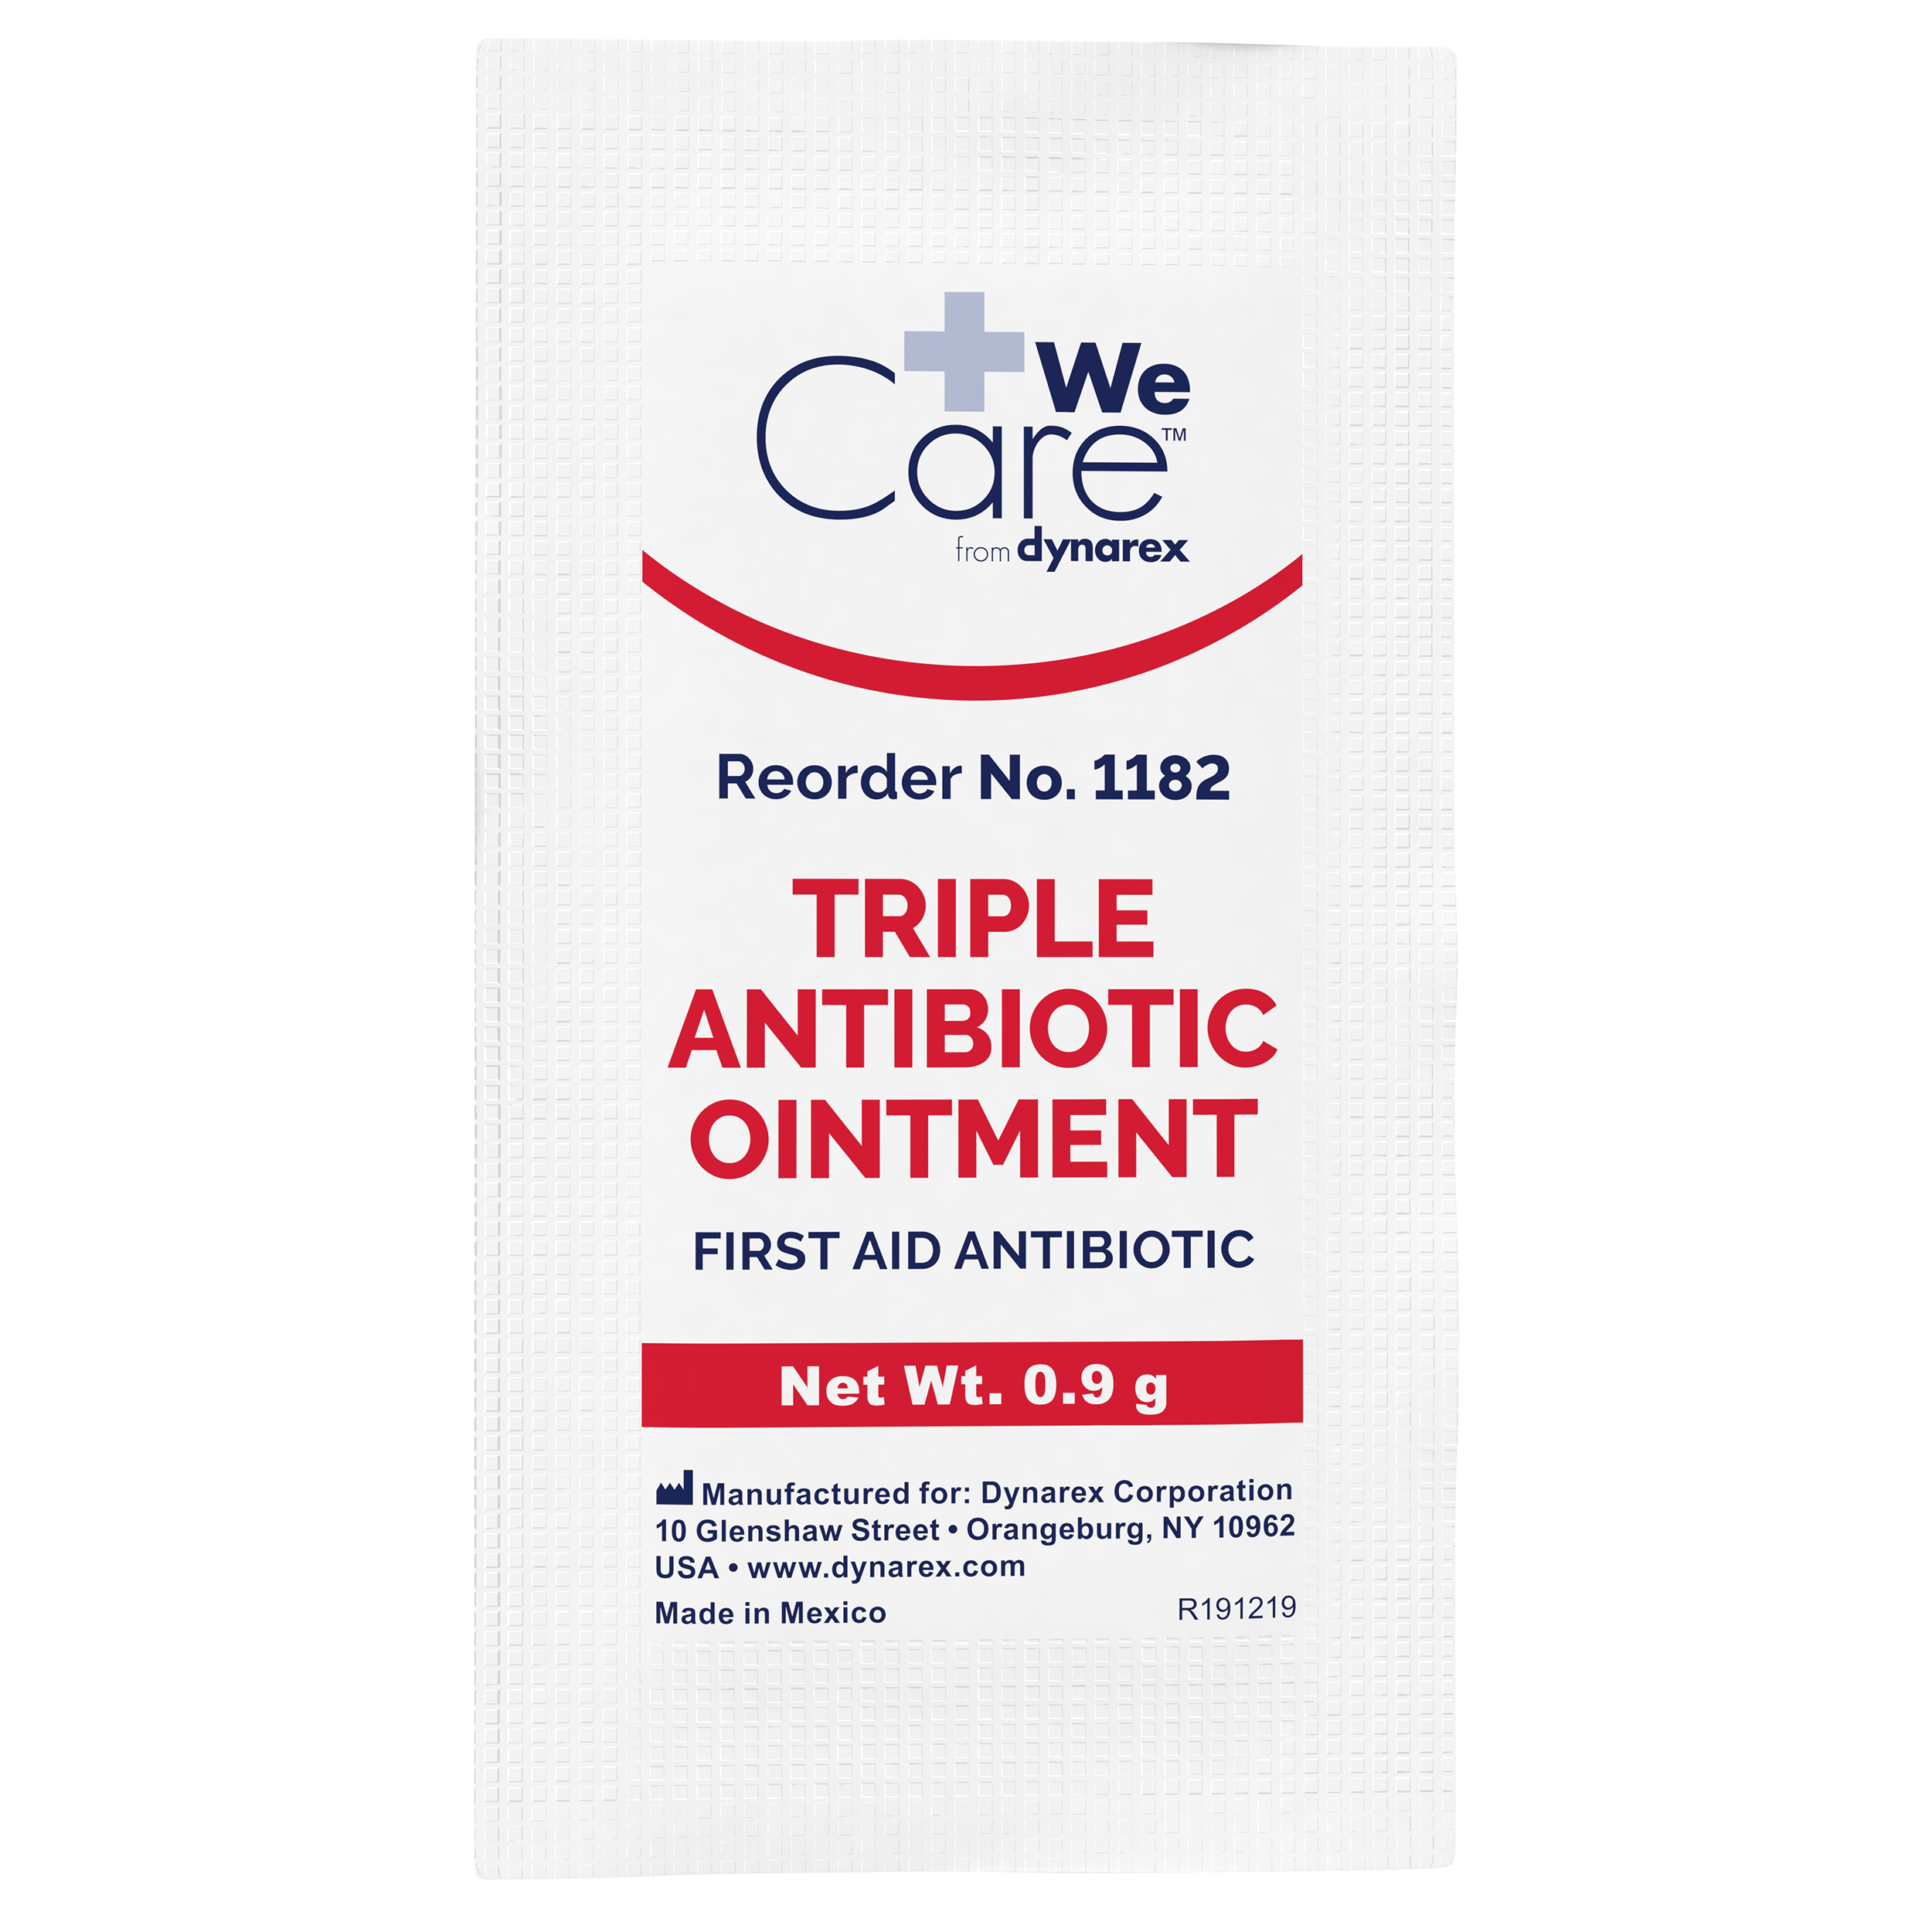 Triple Antibiotic Ointment 0.9g foil packet